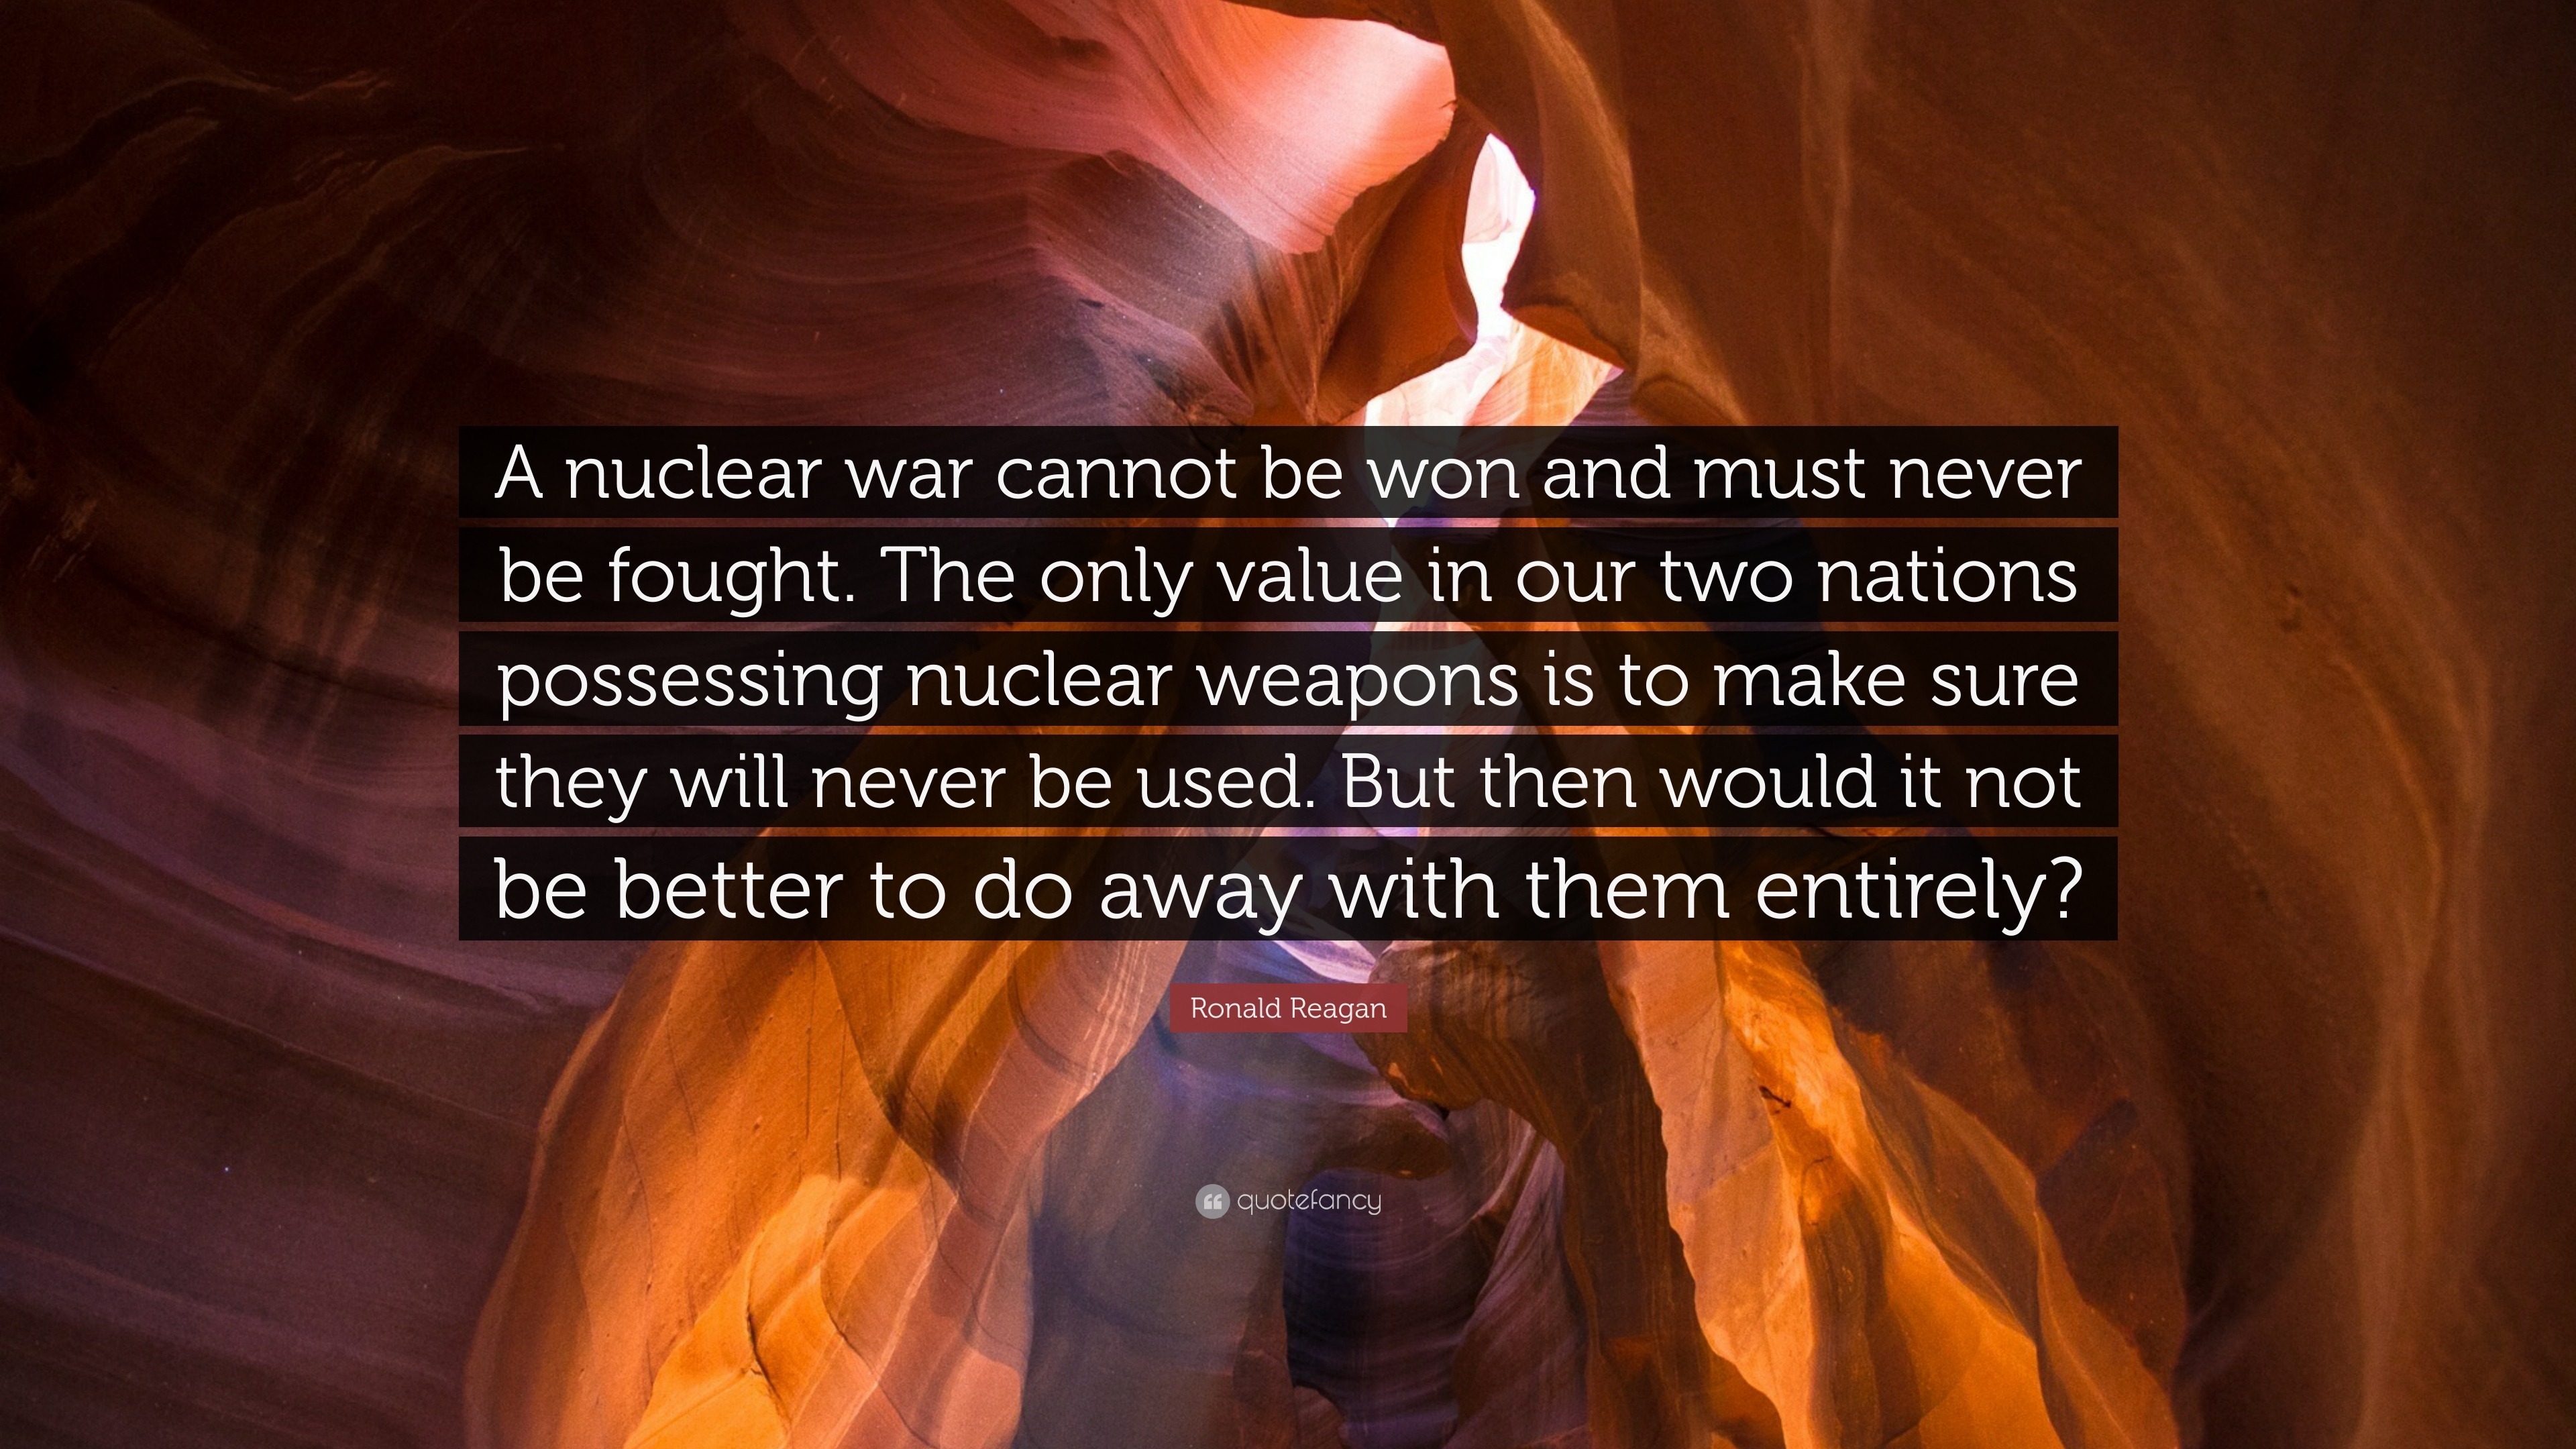 The only value in our two nations possessing nuclear weapons is to make sur...